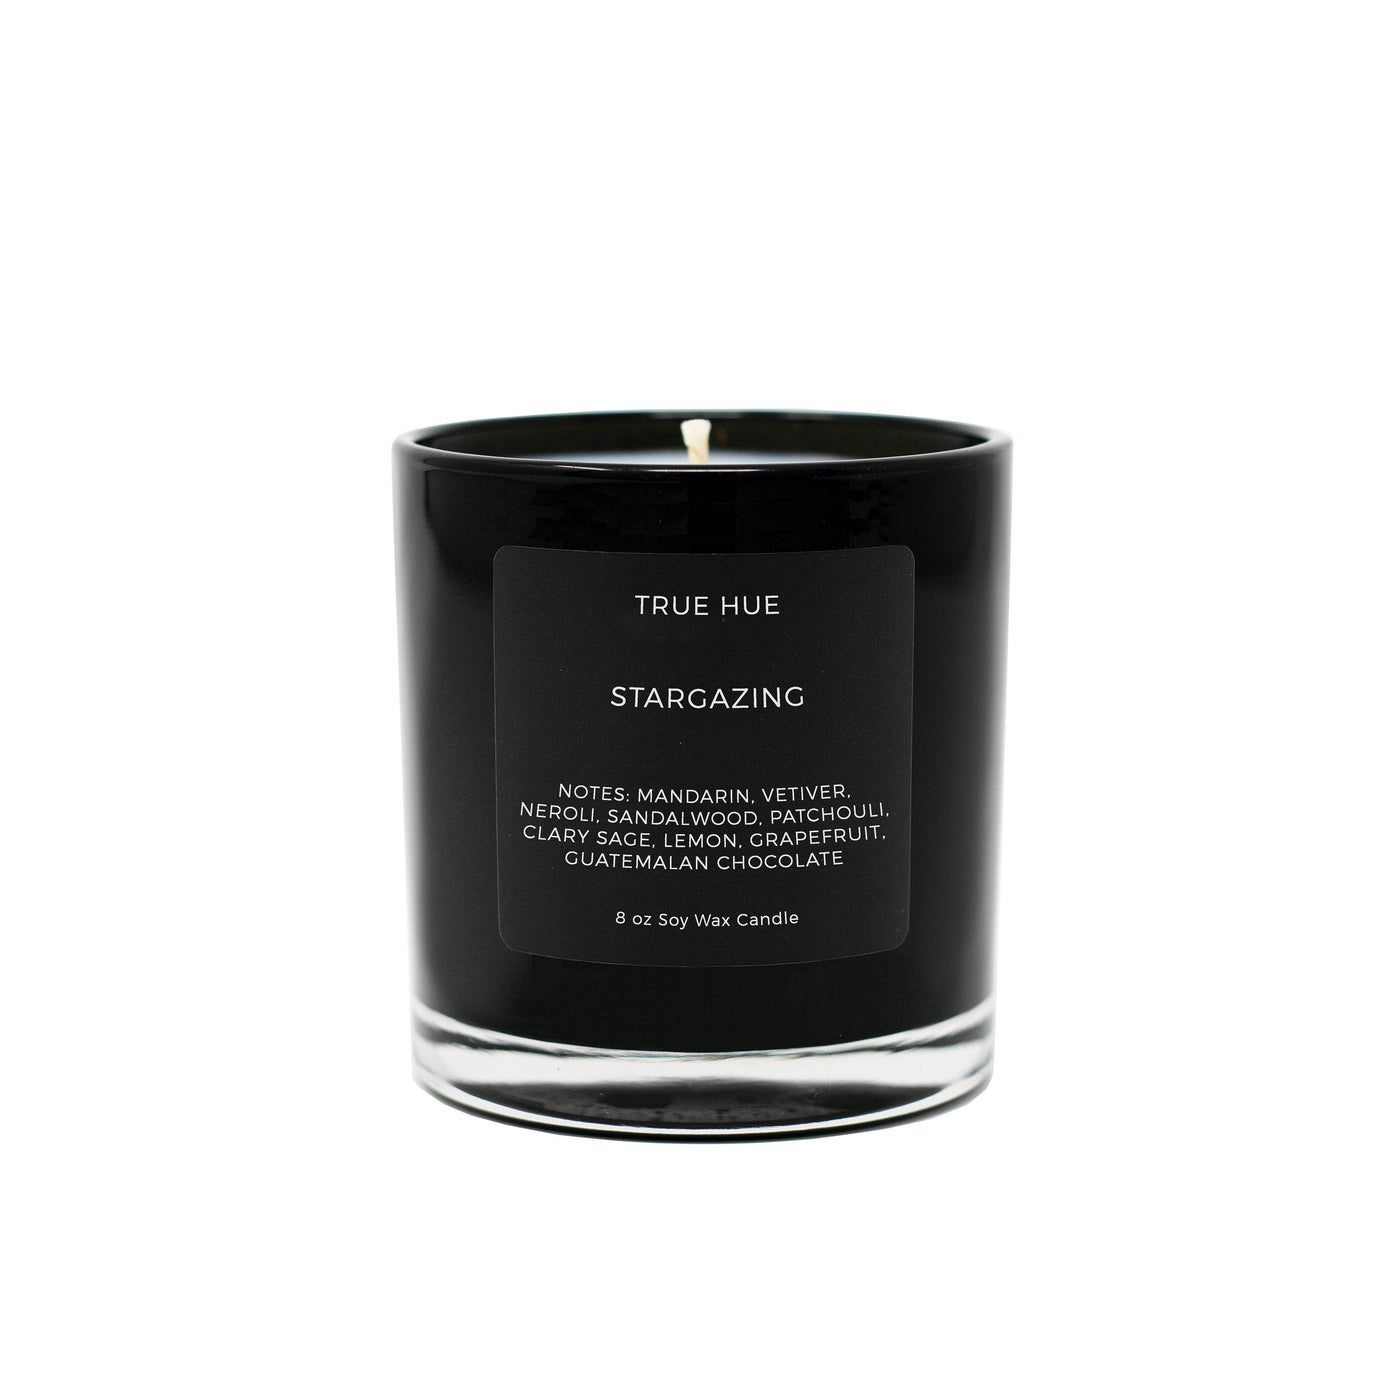 Stargazing Soy Wax Candle - The Lake and Company